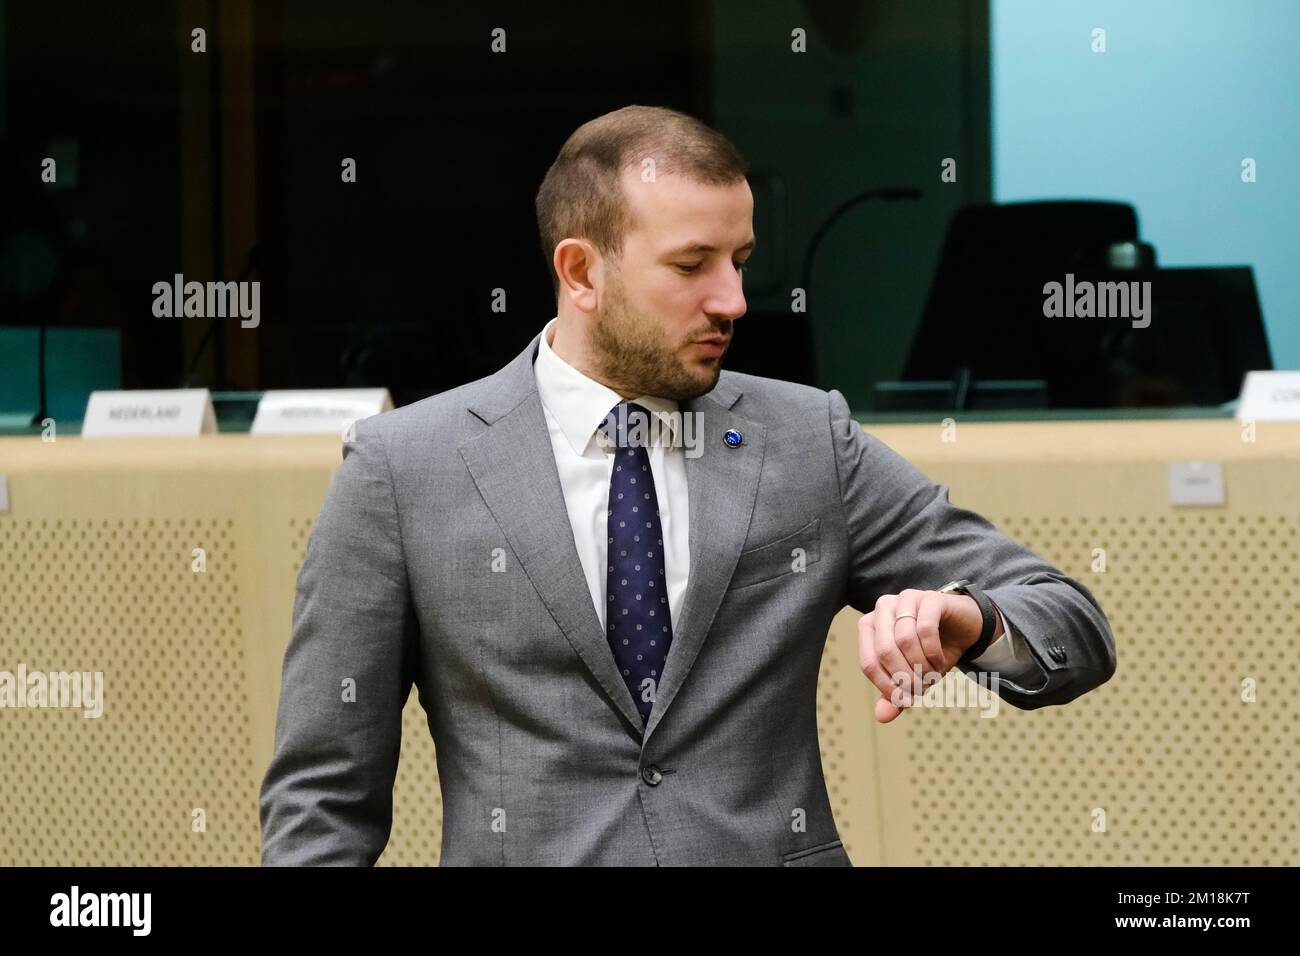 Brussels, Belgium. 11th Dec, 2022. Virginijus SINKEVICIUS, EU Commissioner arrives to attend in an European Council of Agriculture and Fisheries Council in Brussels, Belgium on Dec. 11, 2022. Credit: ALEXANDROS MICHAILIDIS/Alamy Live News Stock Photo